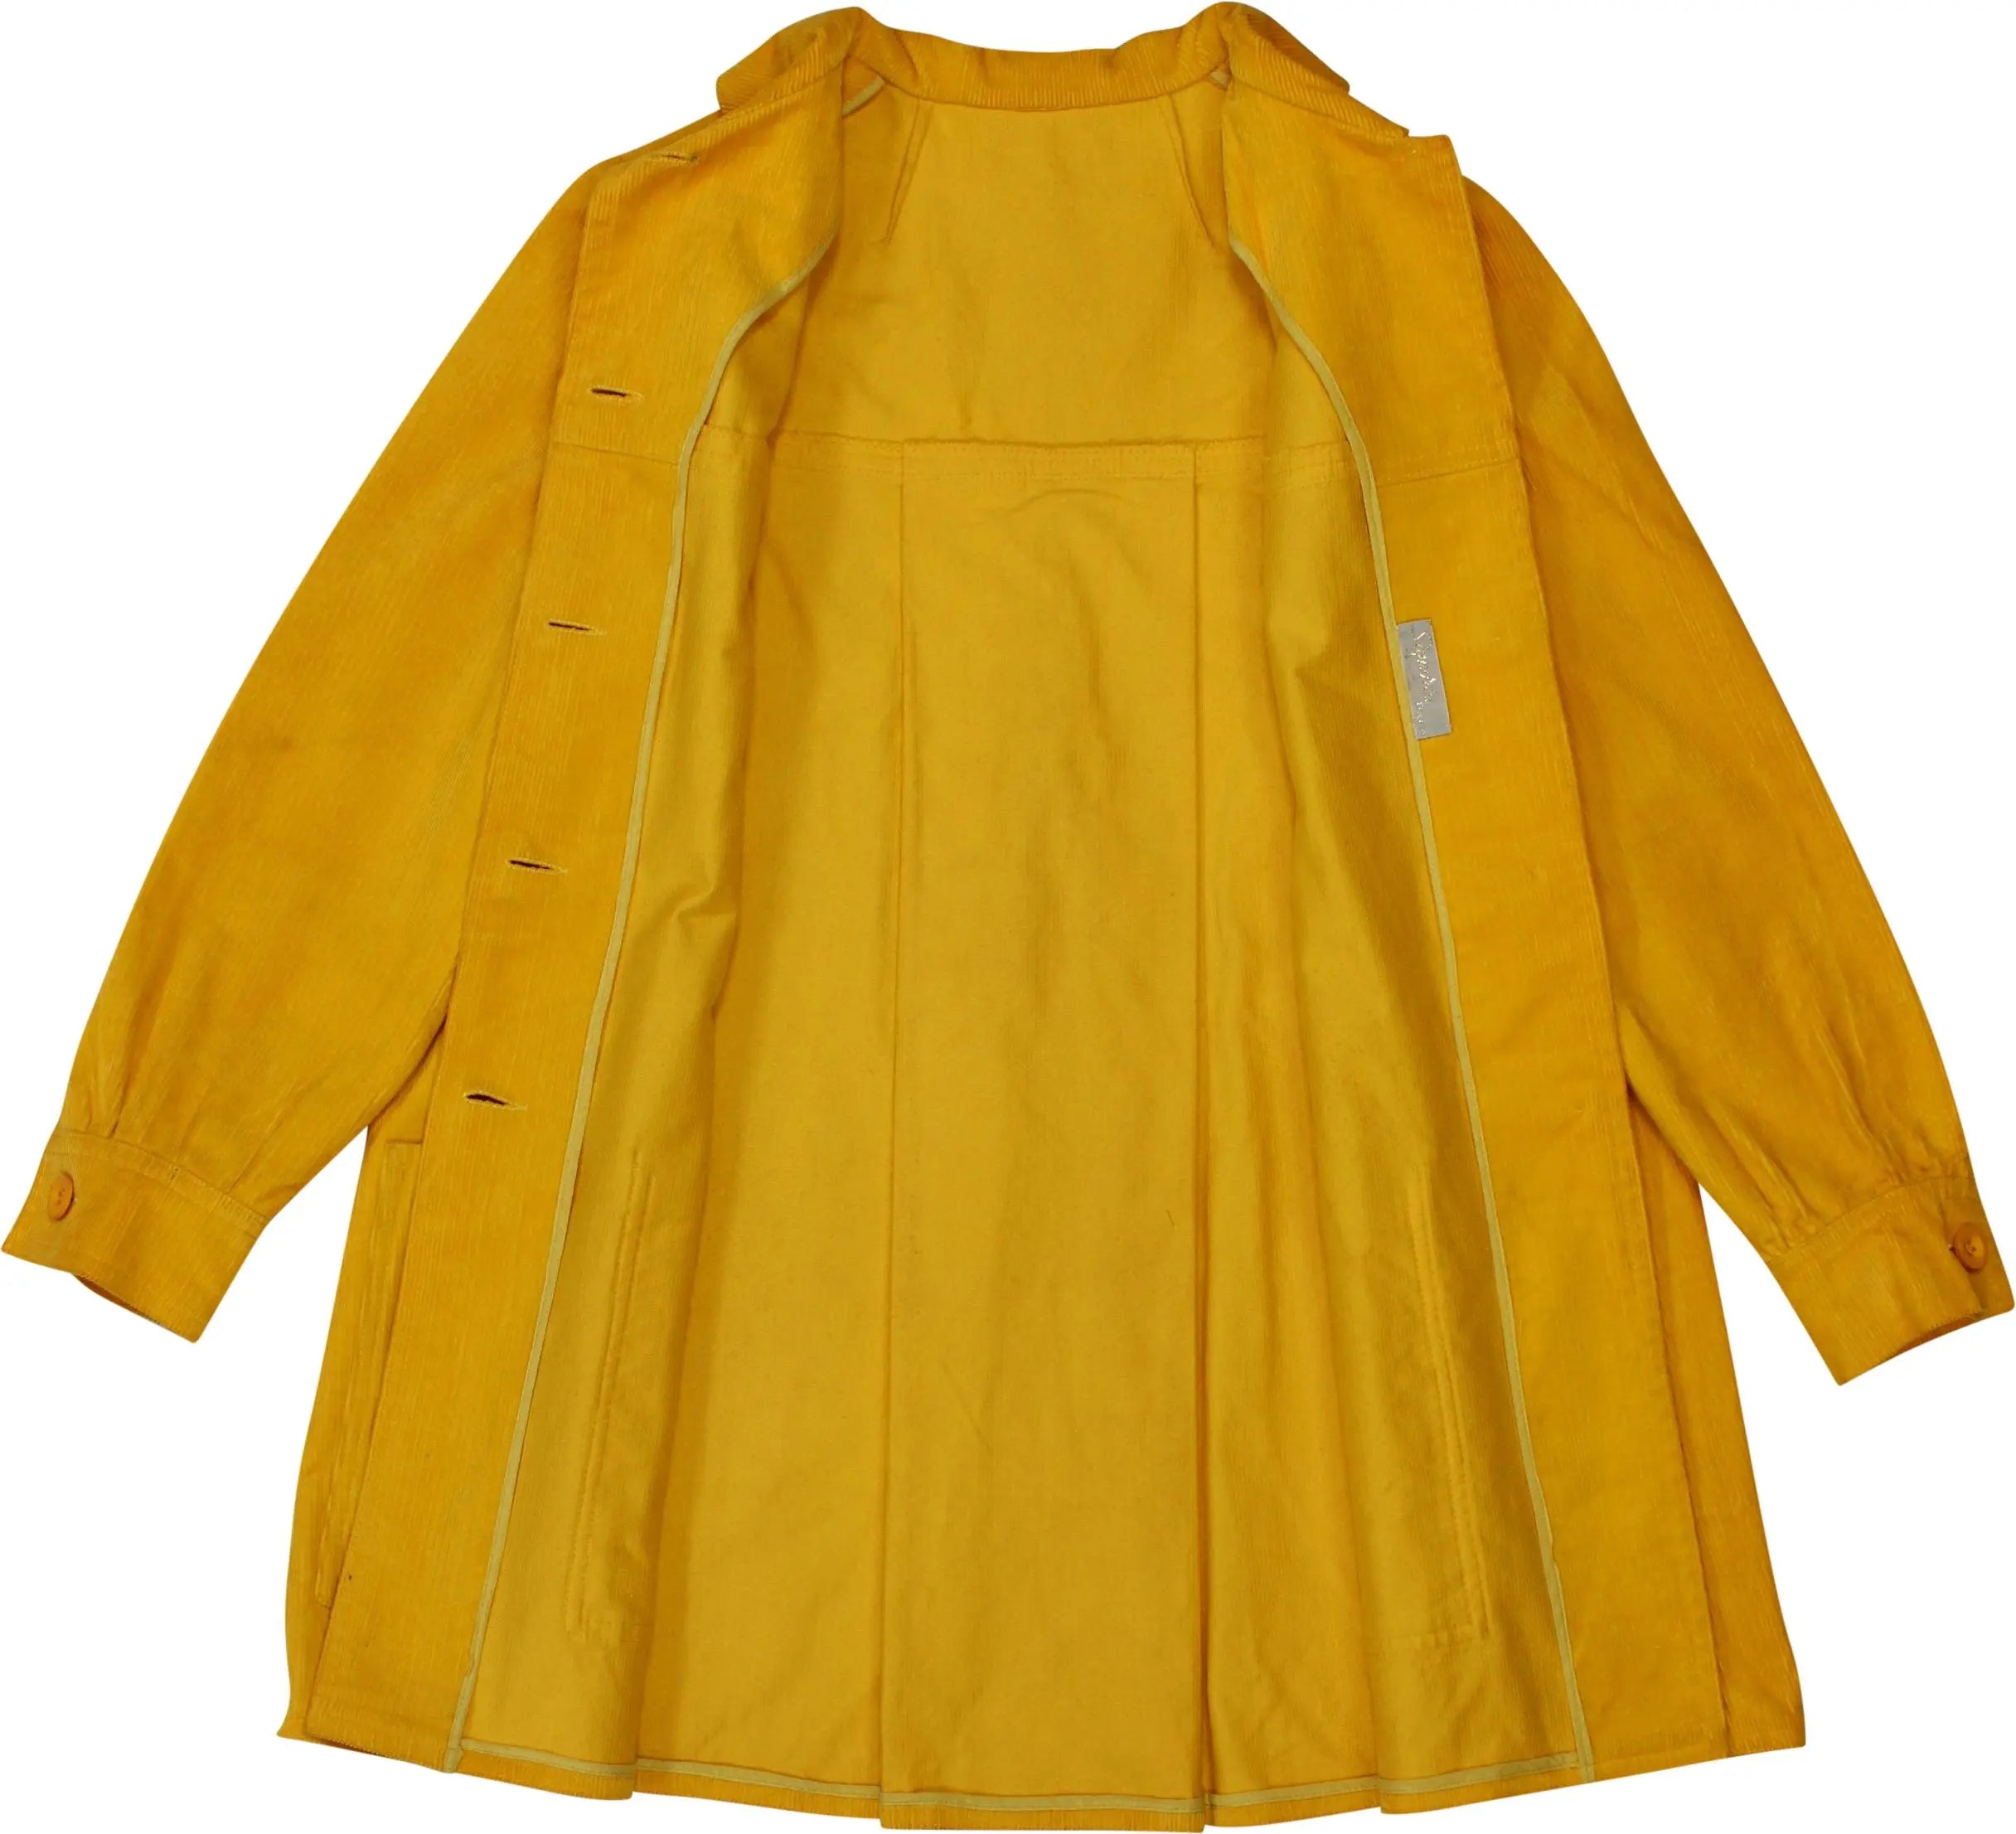 Unknown - Yellow Corduroy Jacket- ThriftTale.com - Vintage and second handclothing